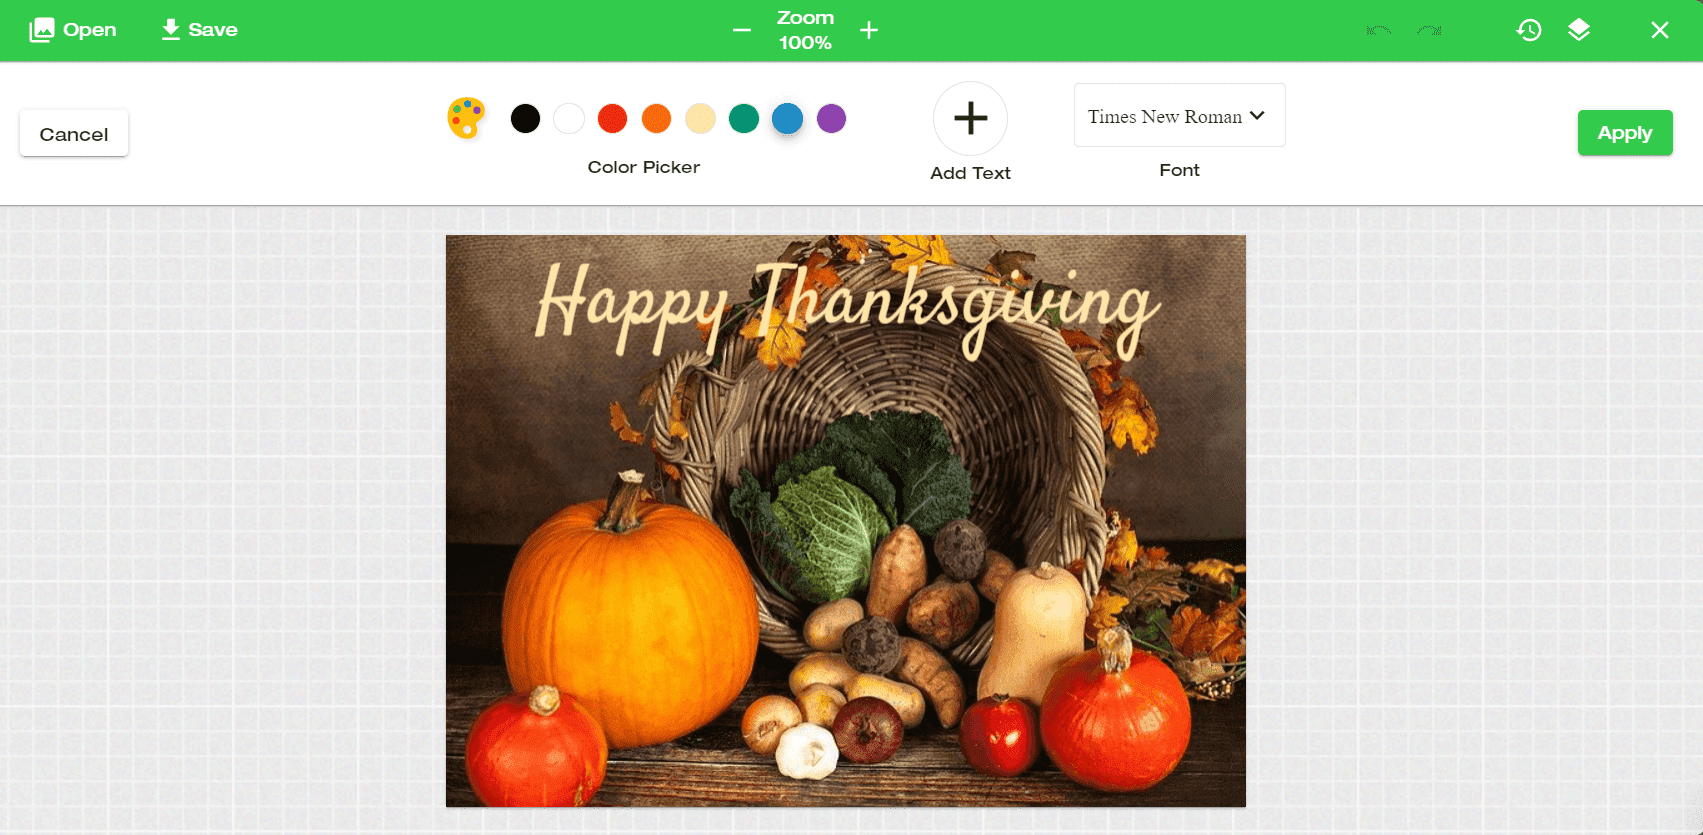 Happy Thanksgiving Email_Editing Photos in the Drag and Drop Editor